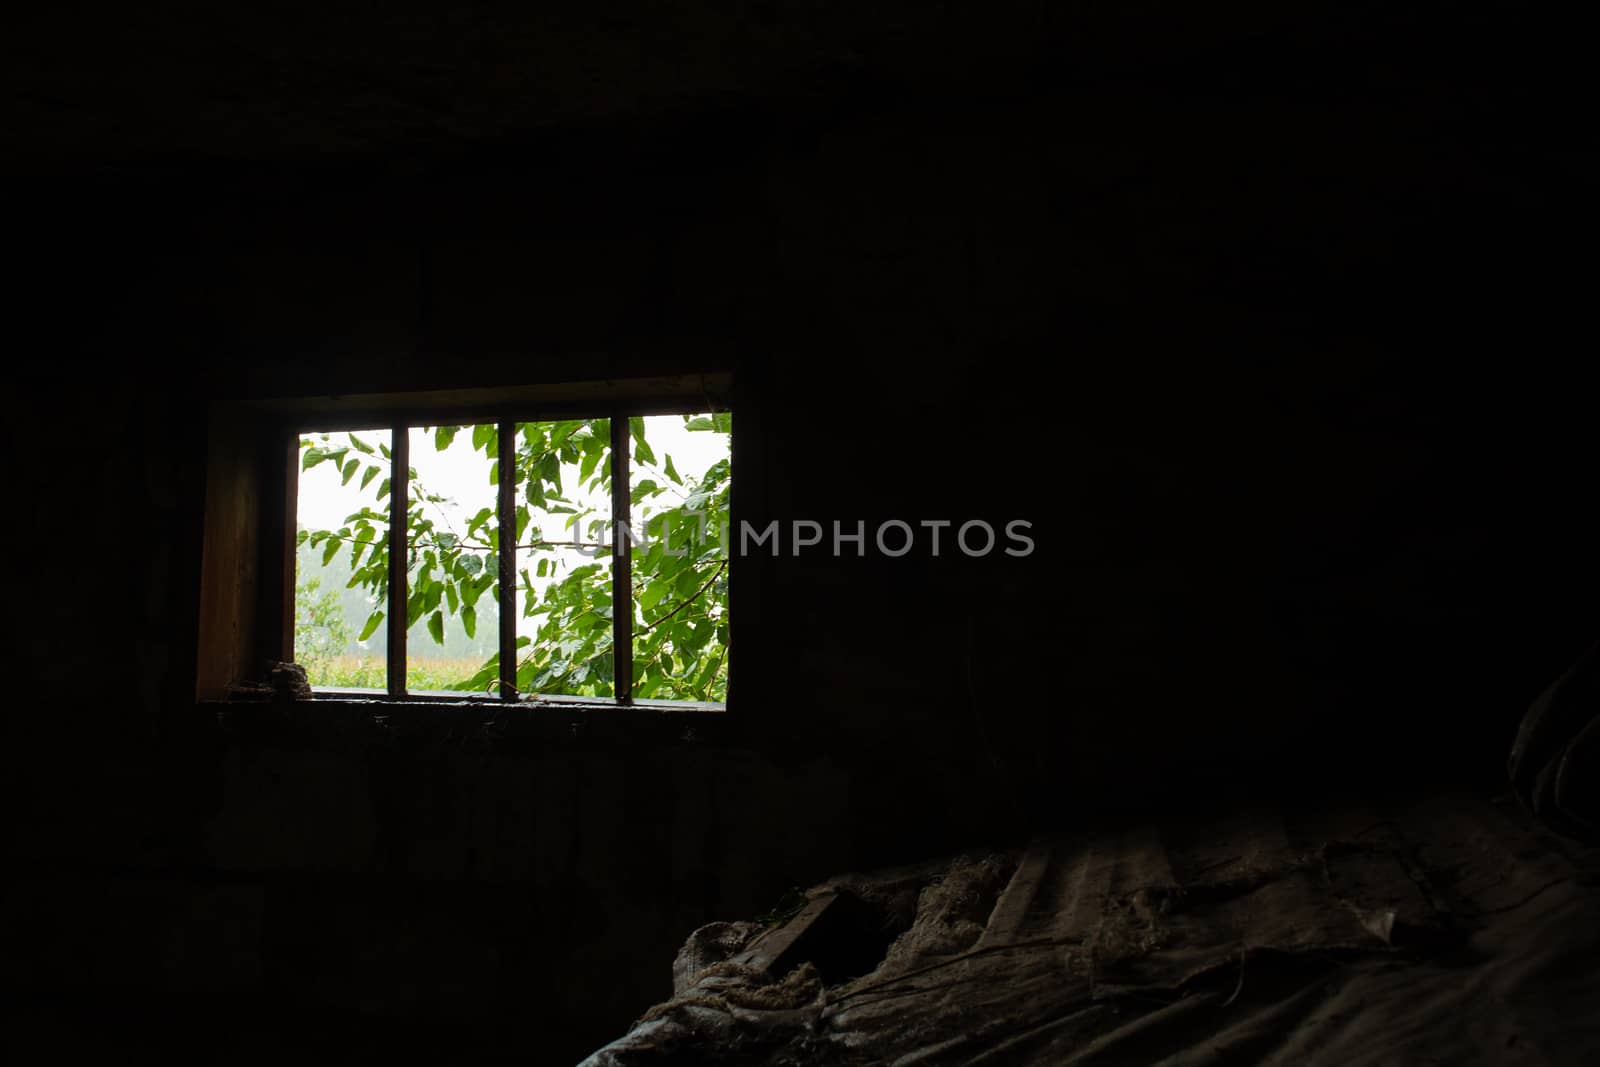 Light enters a dark barn through a small window in which a green tree is visible